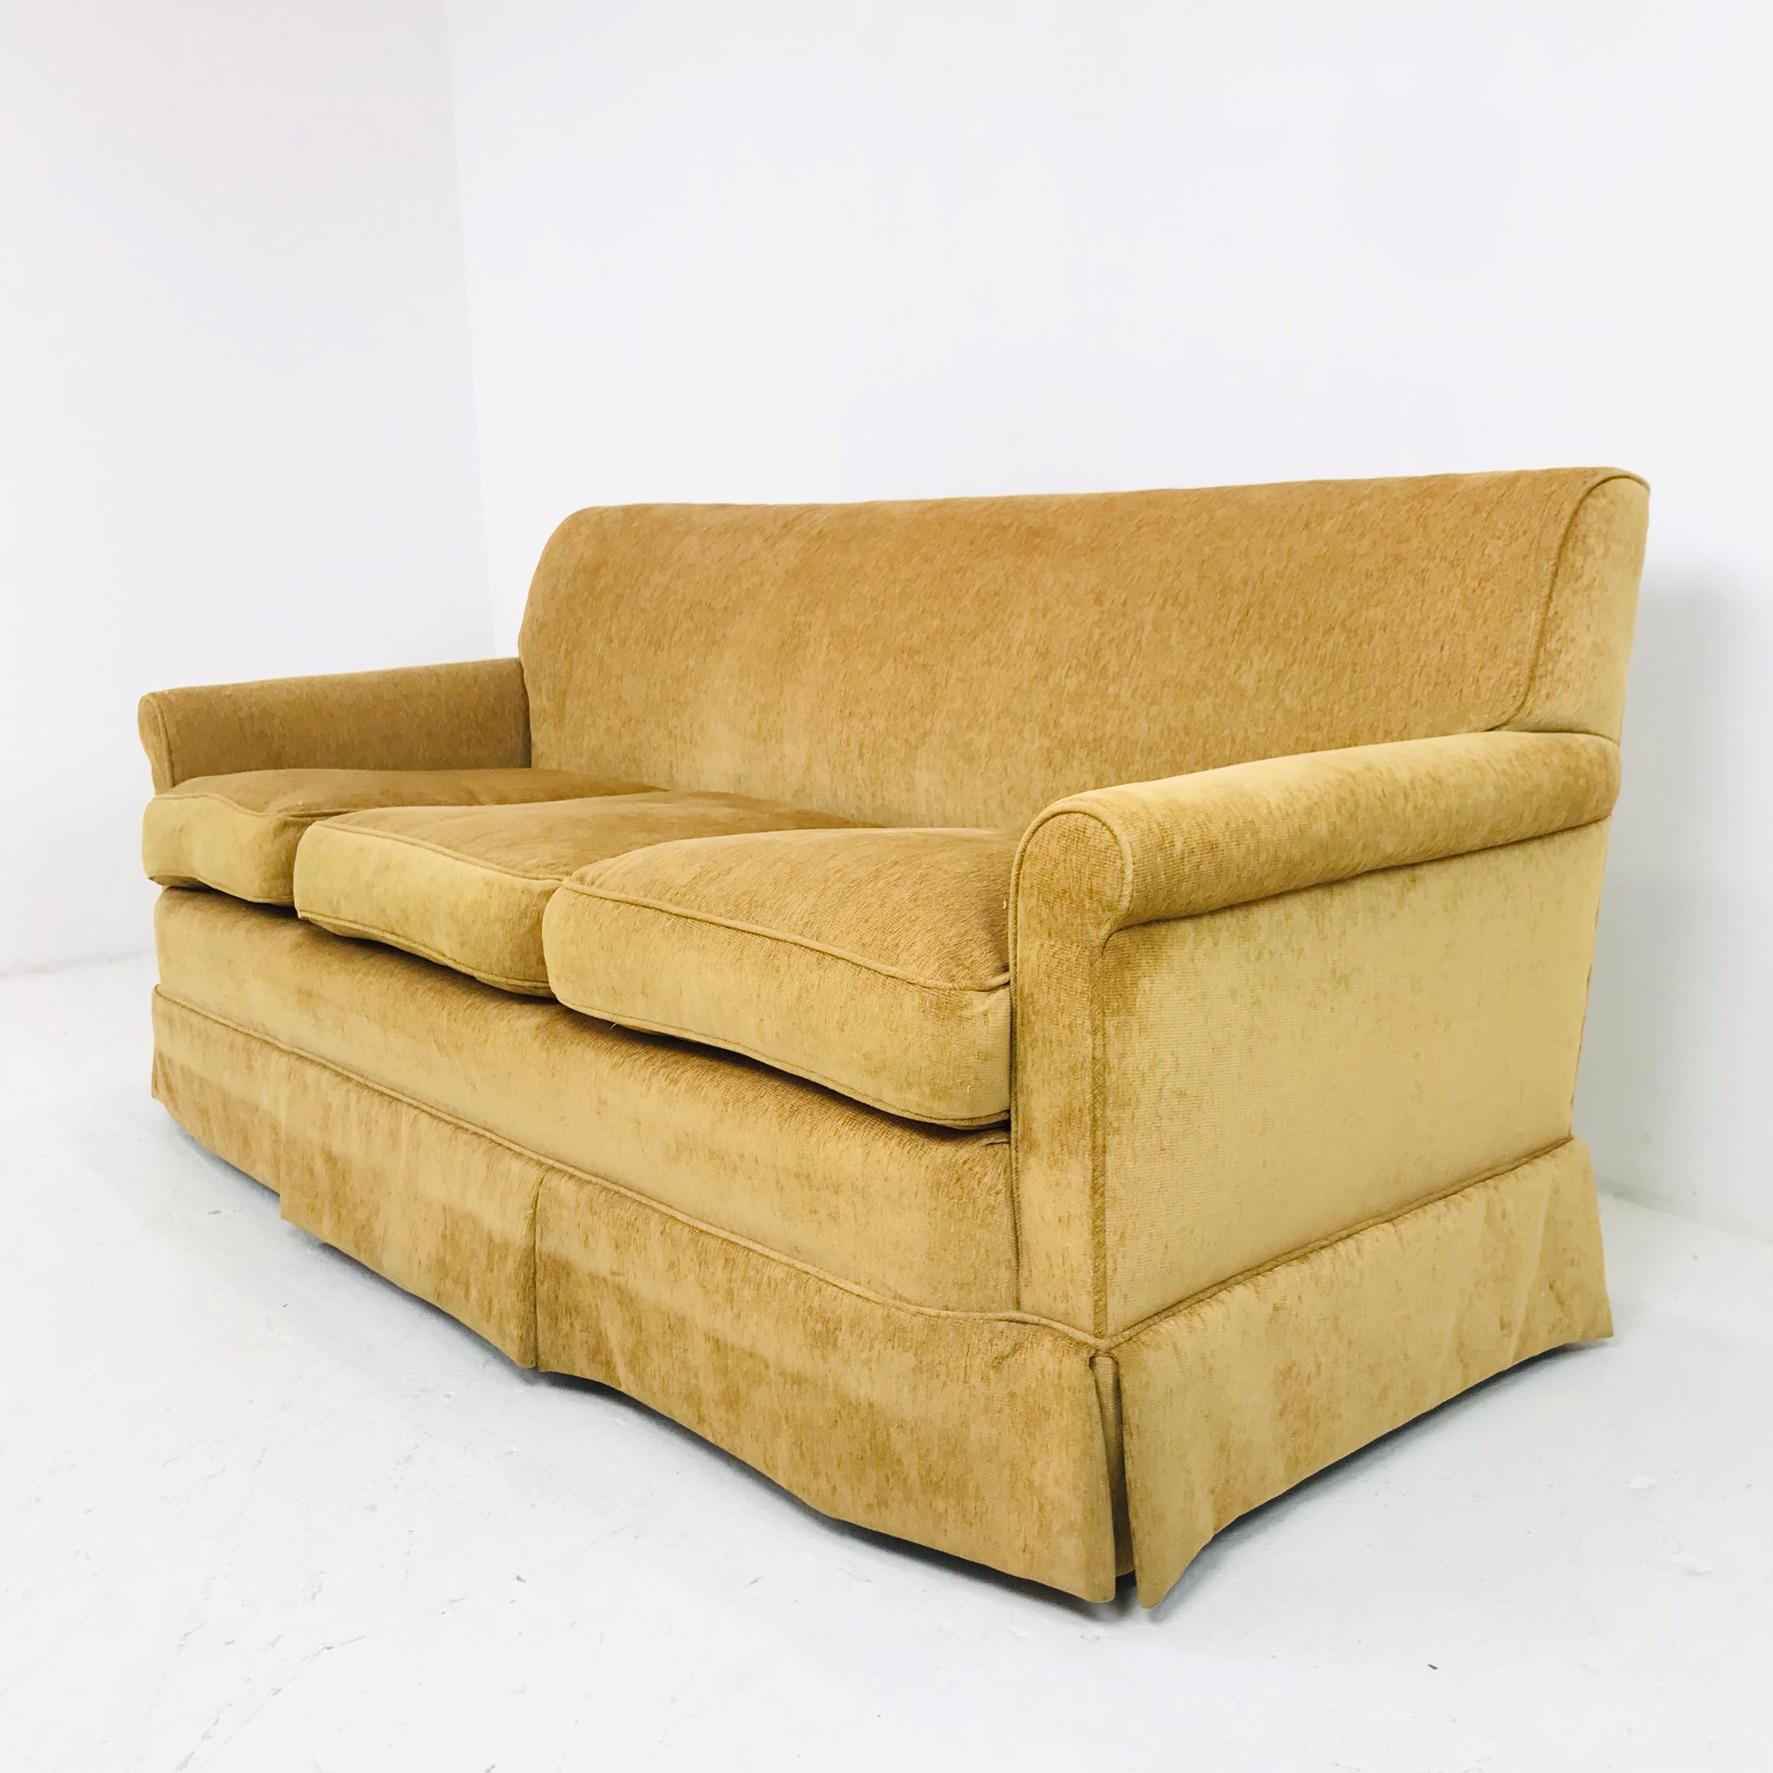 1960s Custom Slipcovered Sofa by DeAngelis for Billy Baldwin For Sale 1